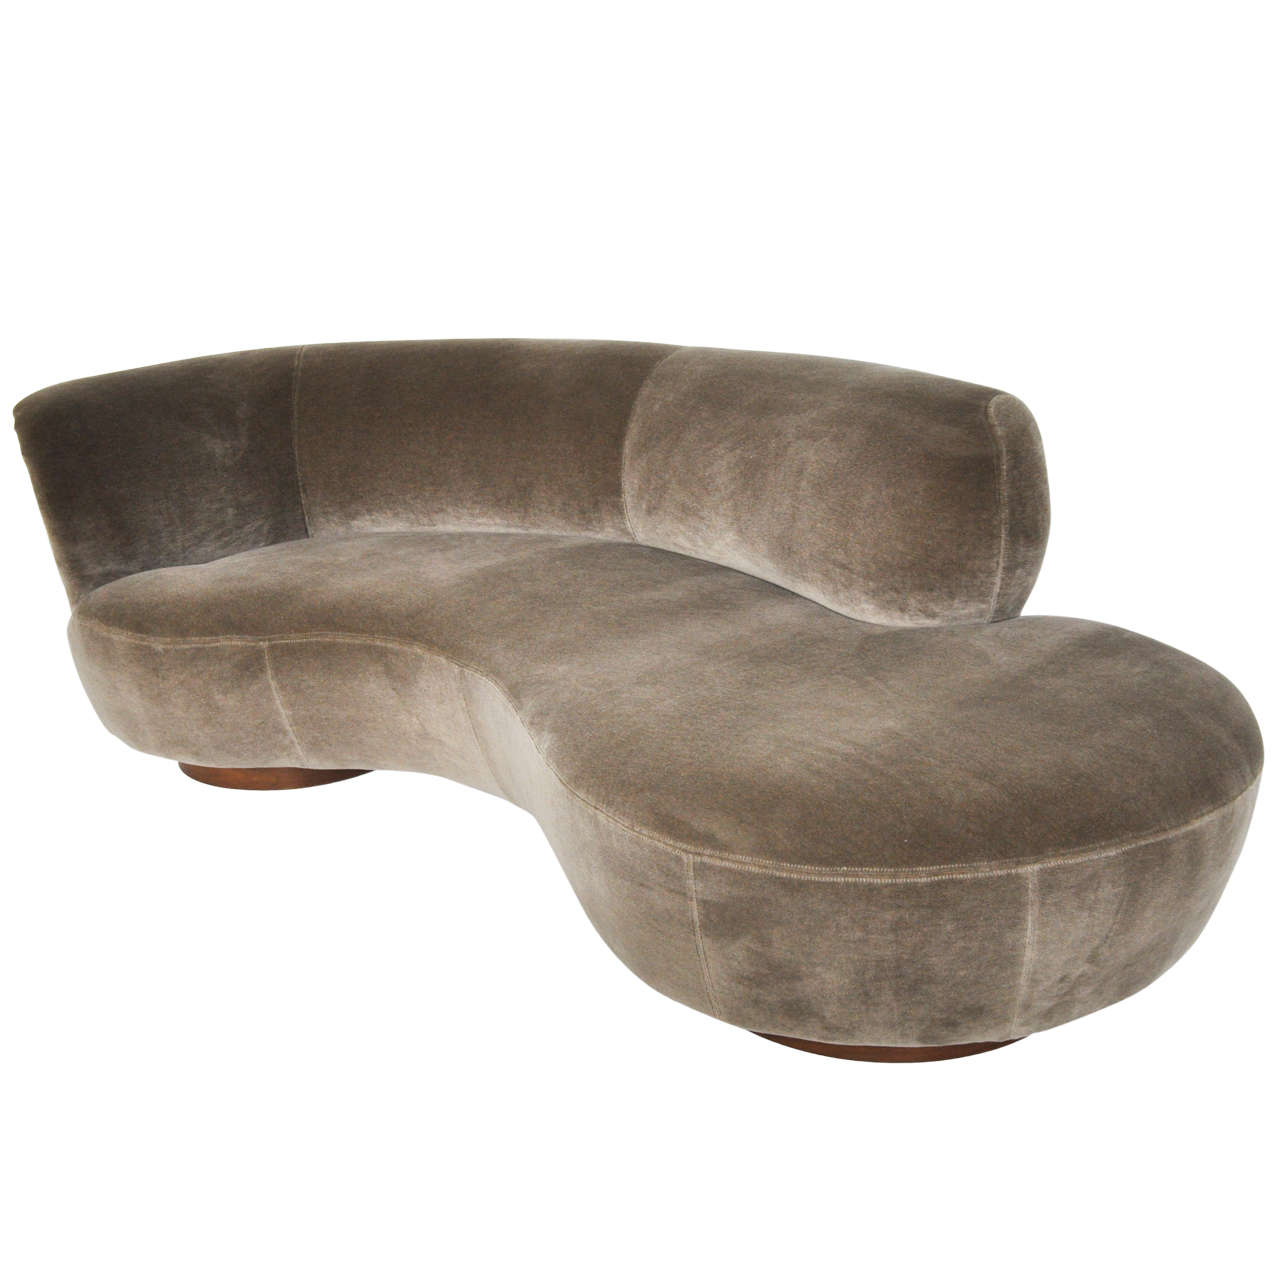 Vladimir Kagan sofa for Directional.  Fully restored.  Walnut bases.  Newly upholstered in extra plush mohair